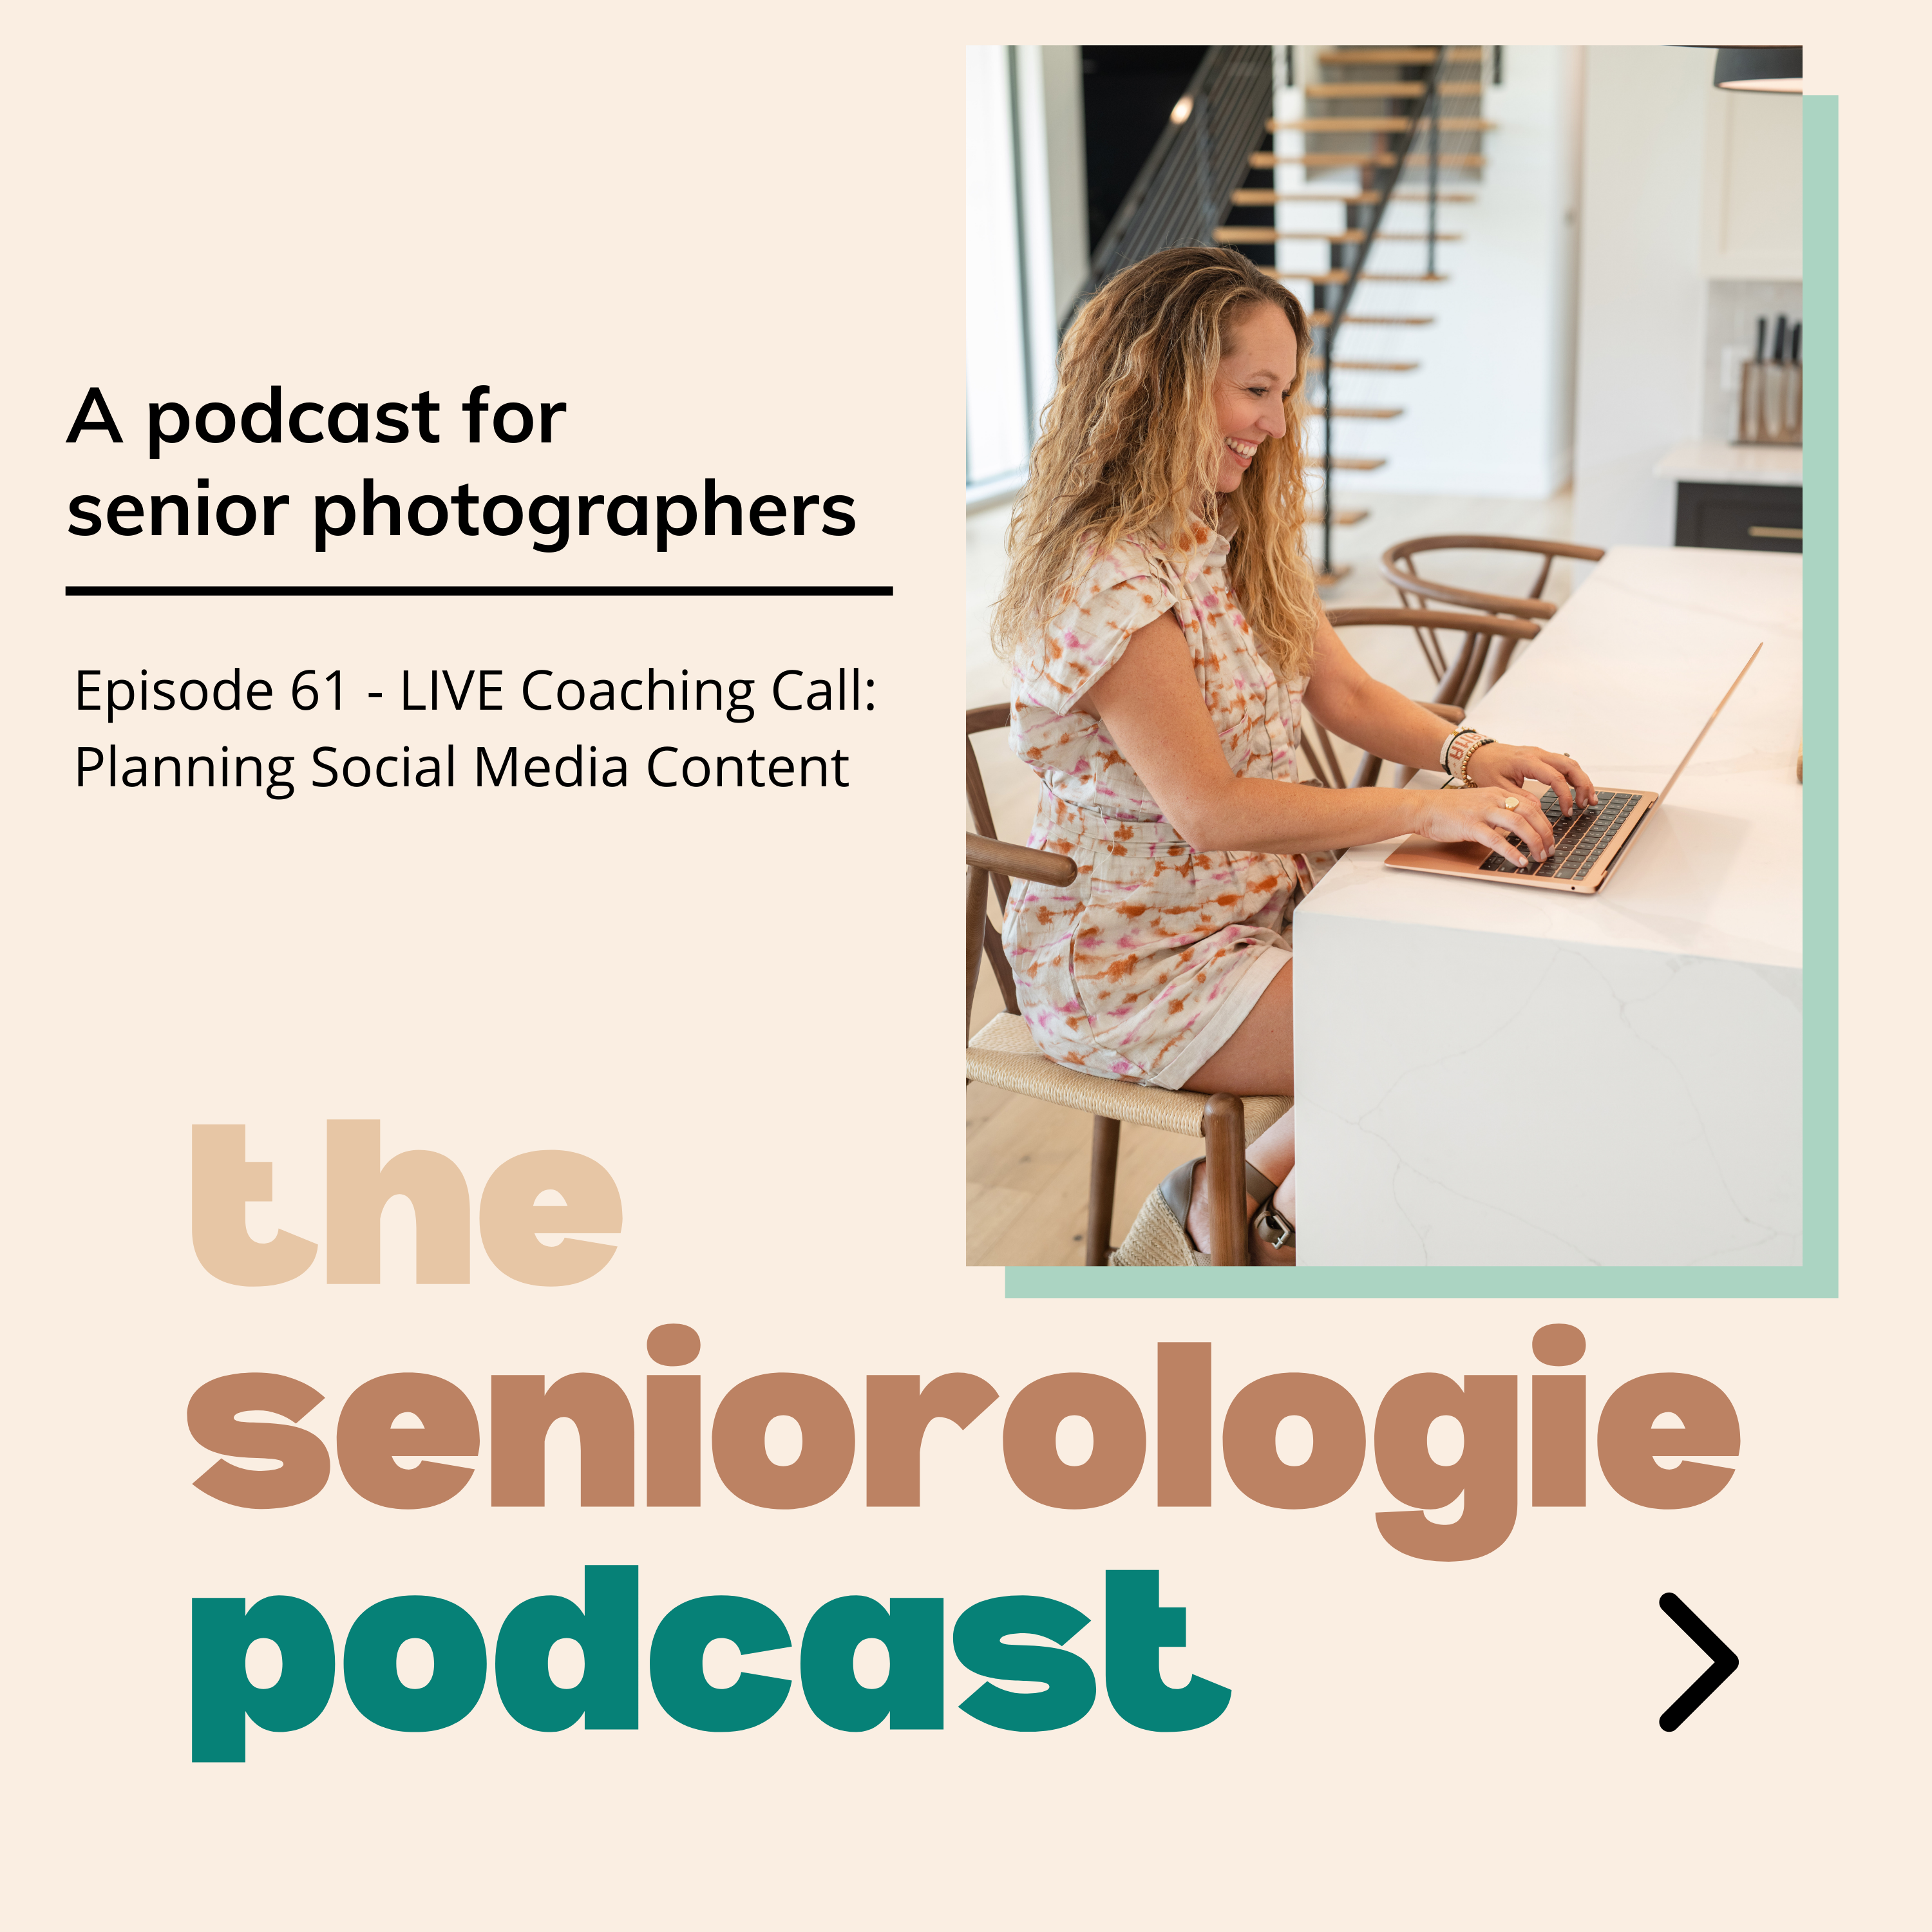 planning social media content with seniorologie